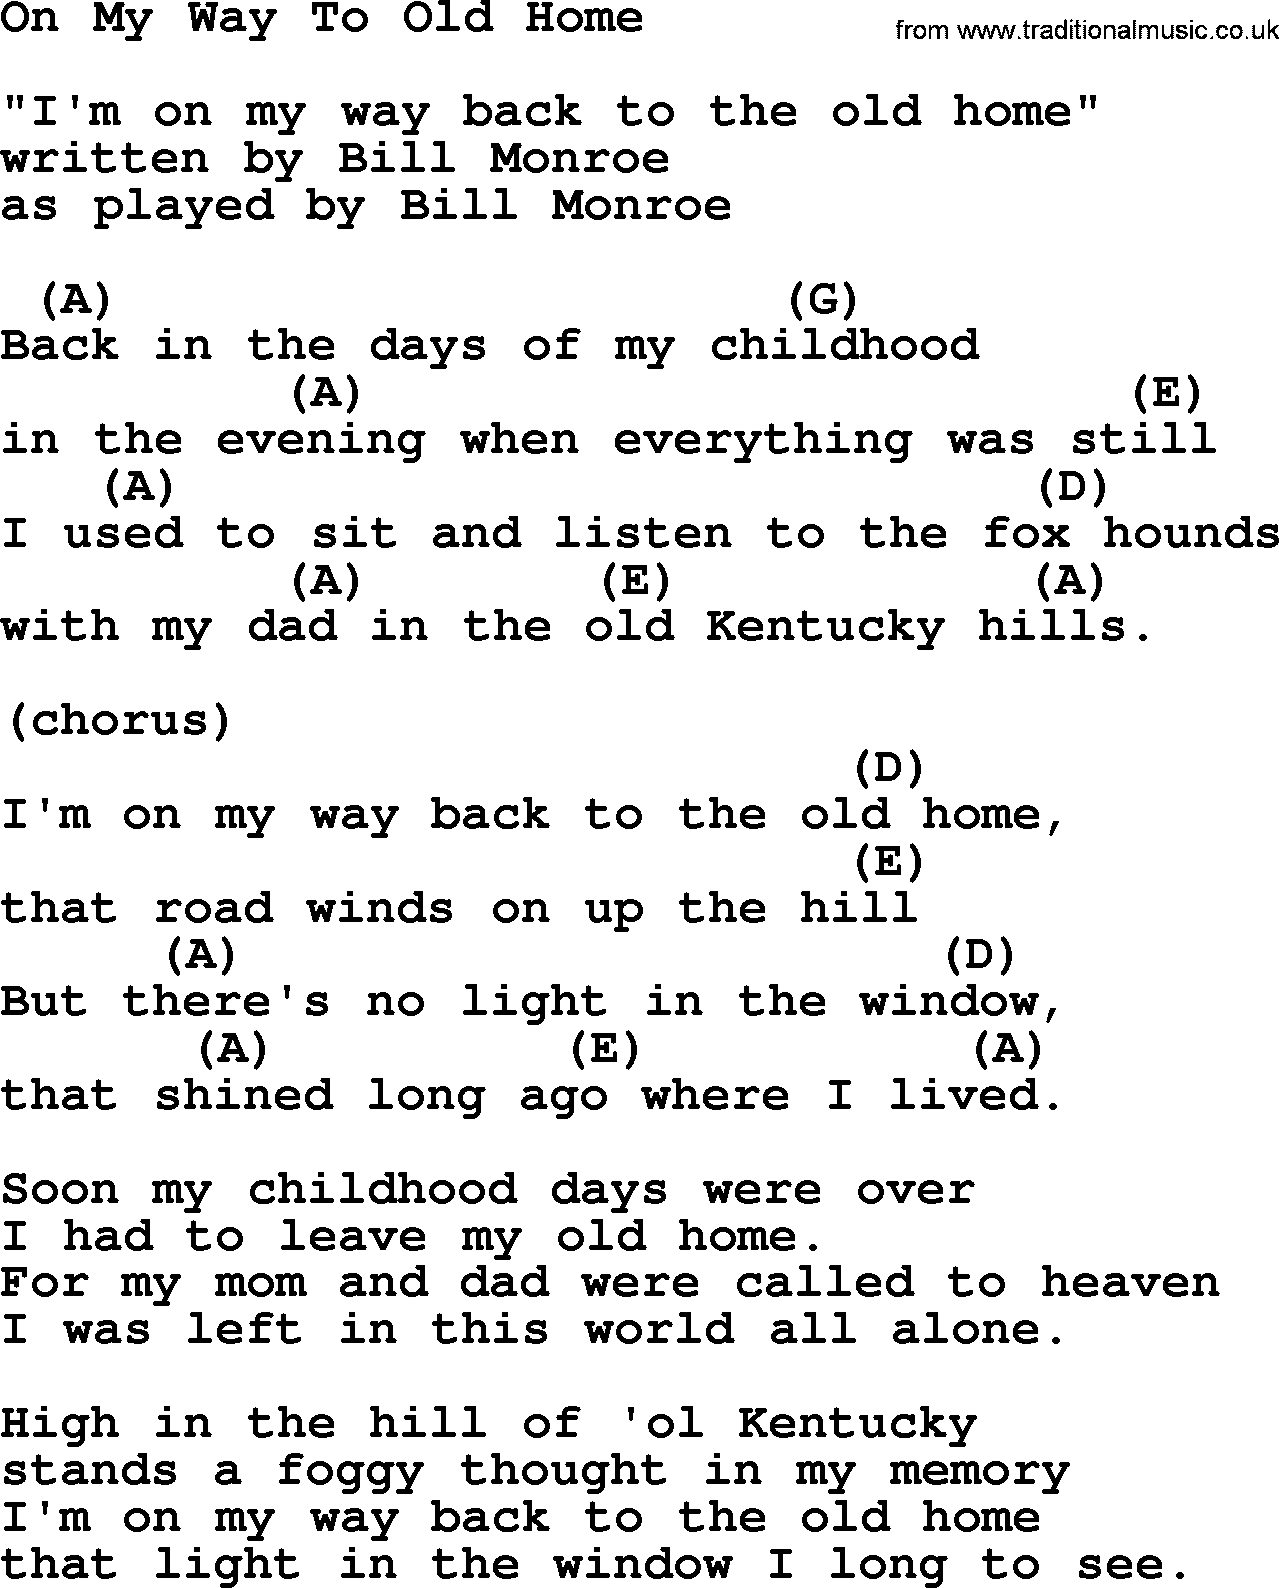 Bluegrass song: On My Way To Old Home, lyrics and chords